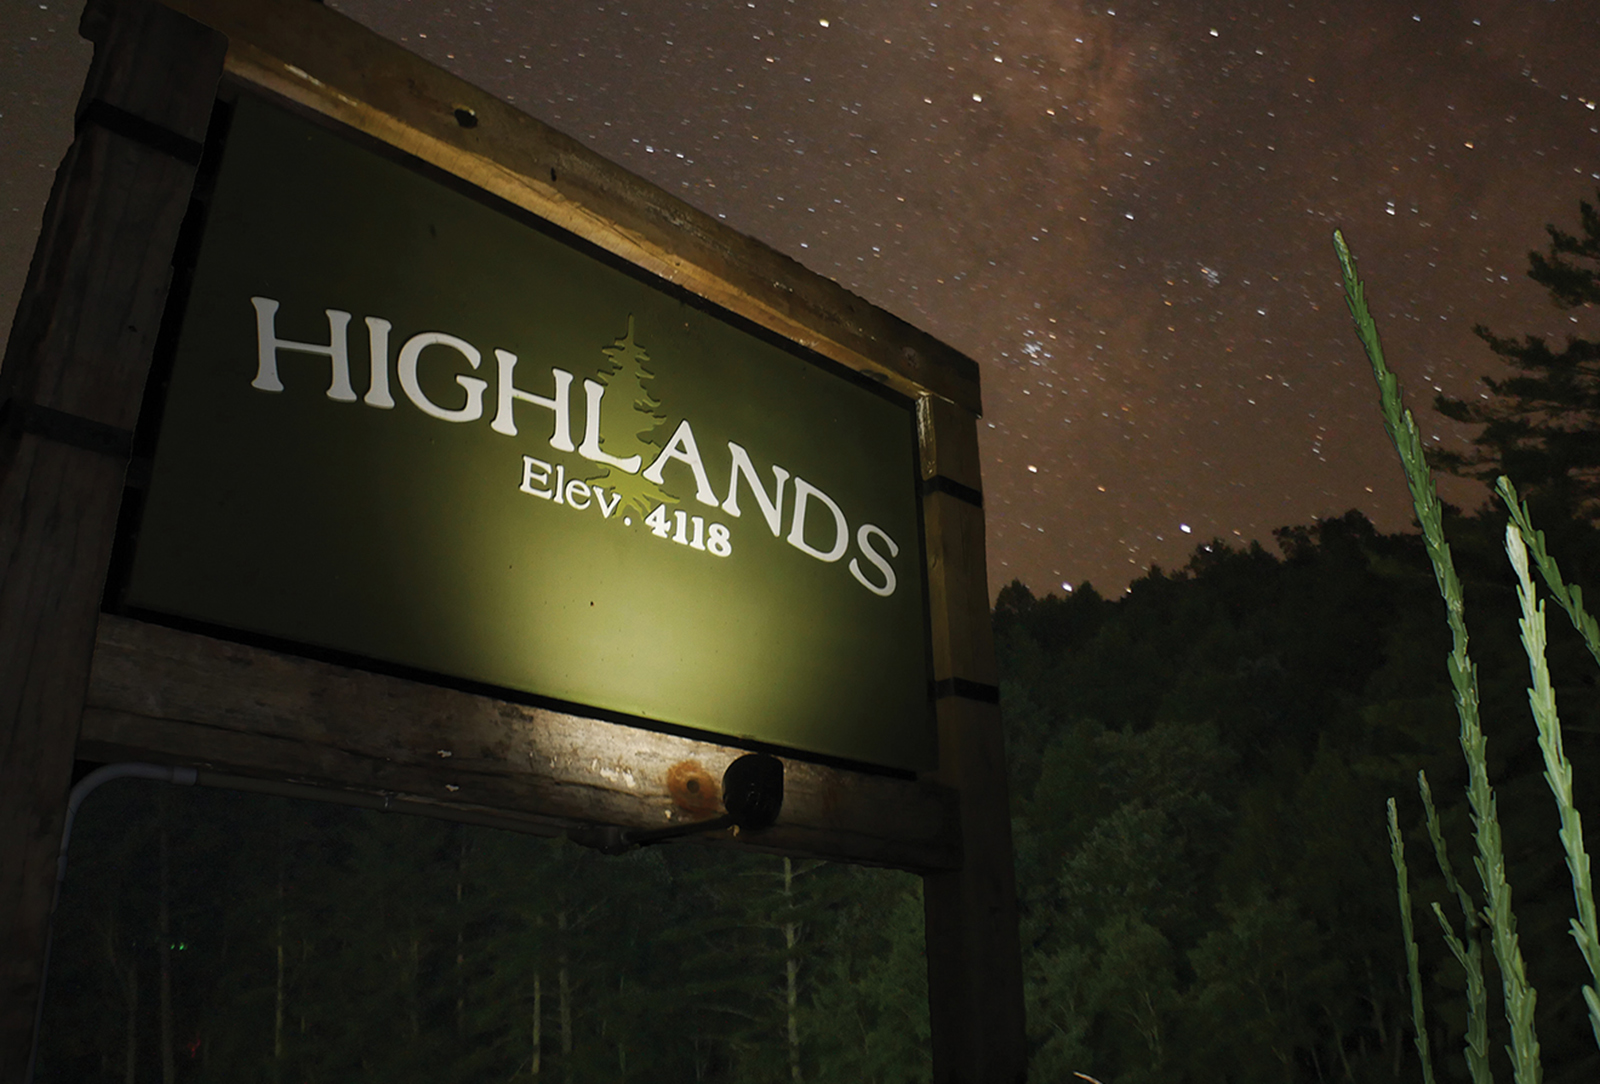 highlands sign-by max renfro nc